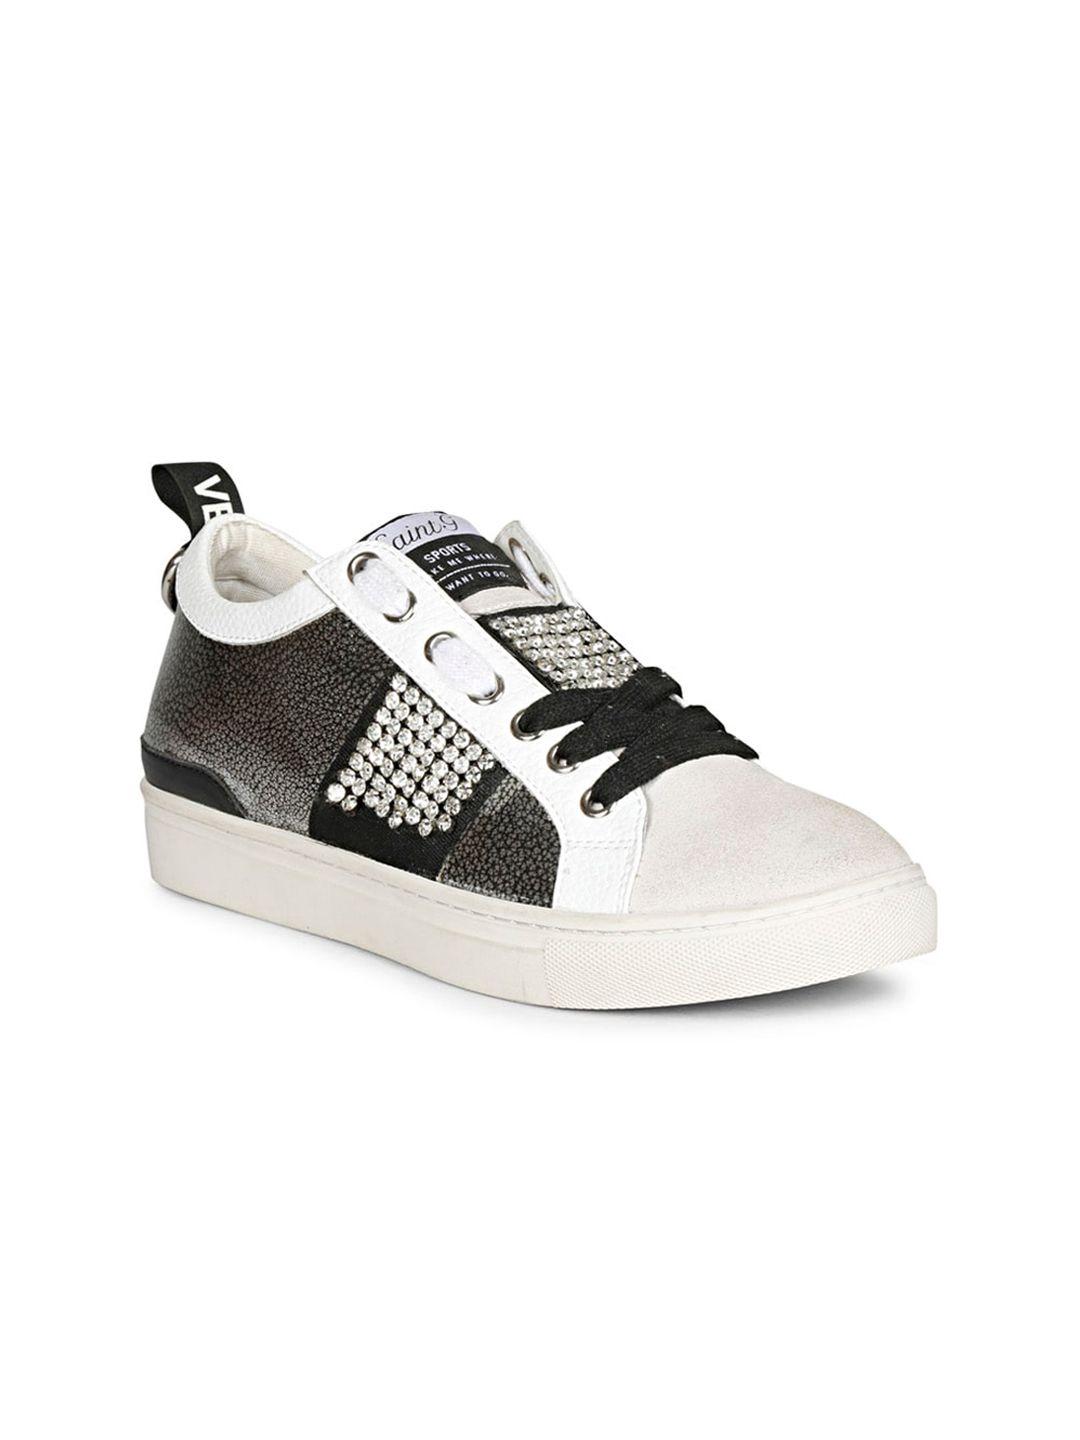 saint g women colourblocked embellished leather sneakers